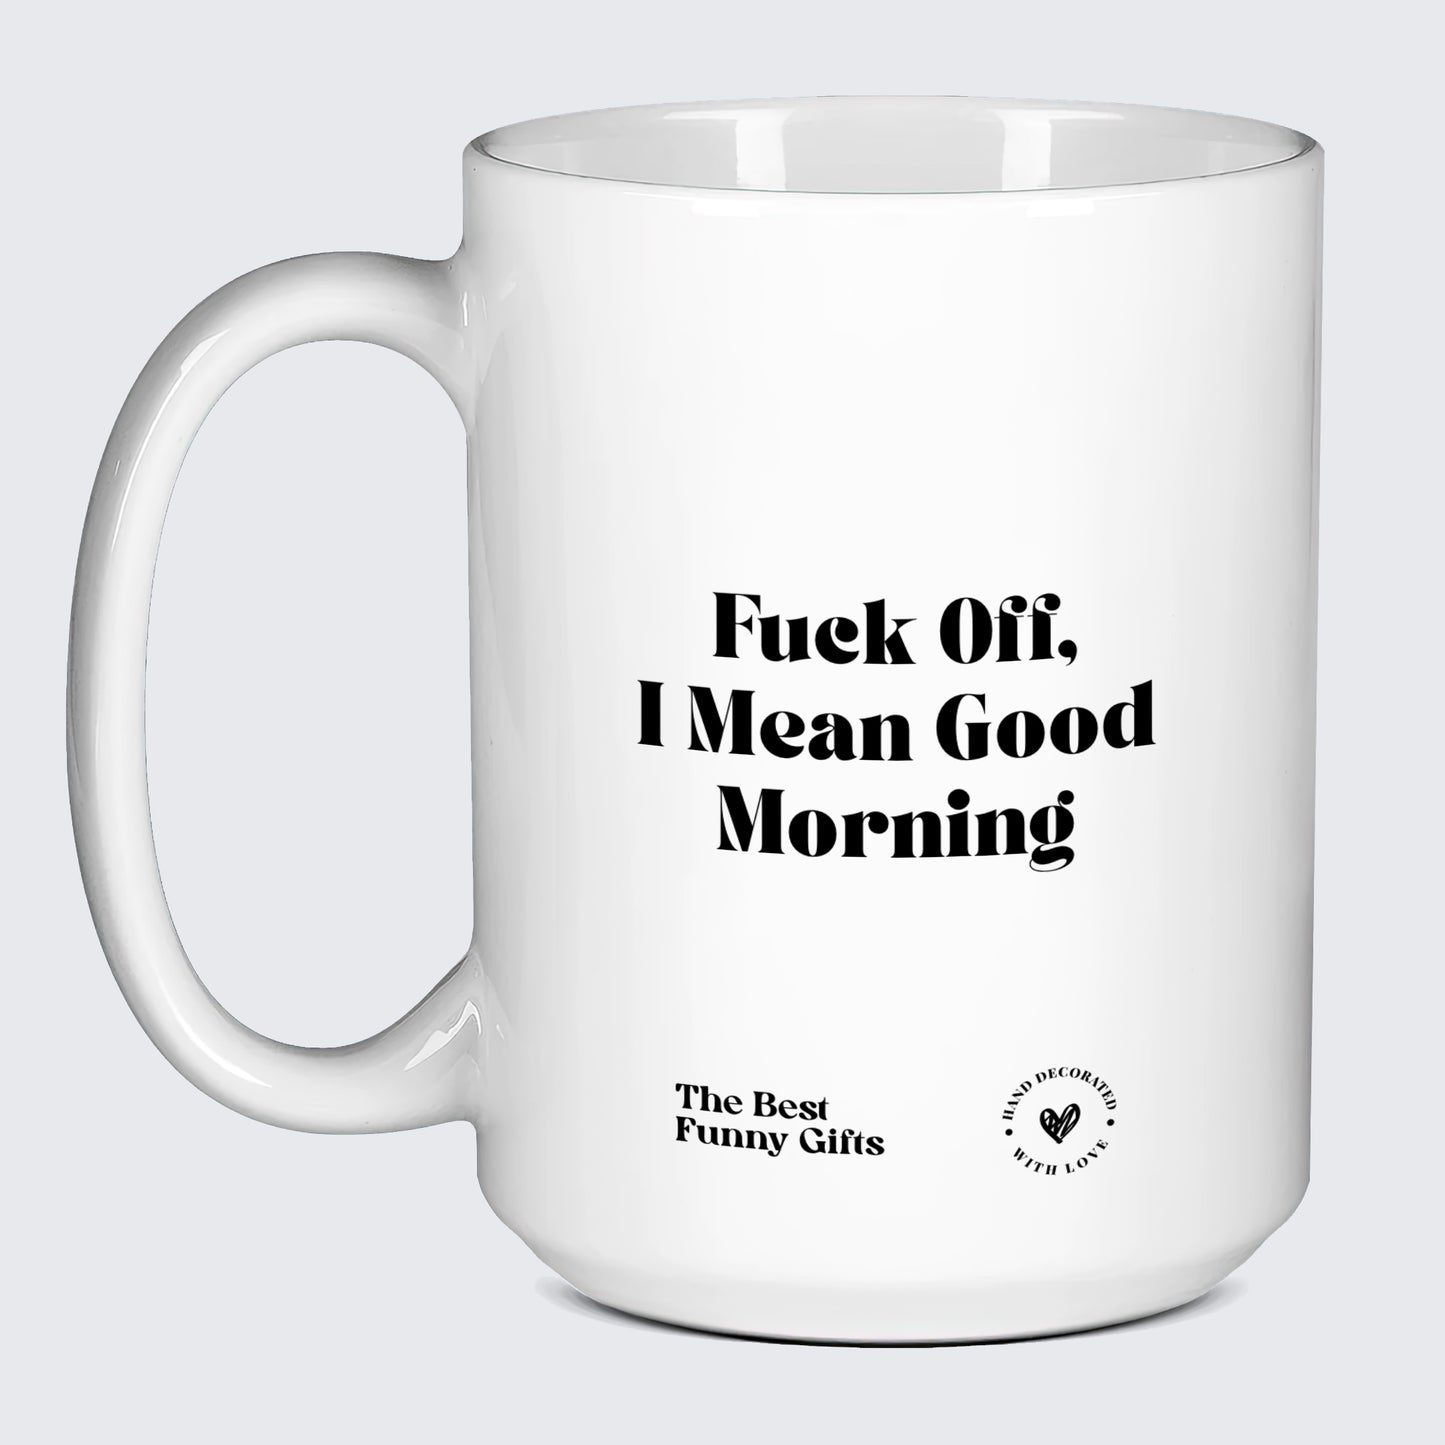 Funny Mugs Fuck Off, I Mean Good Morning - The Best Funny Gifts